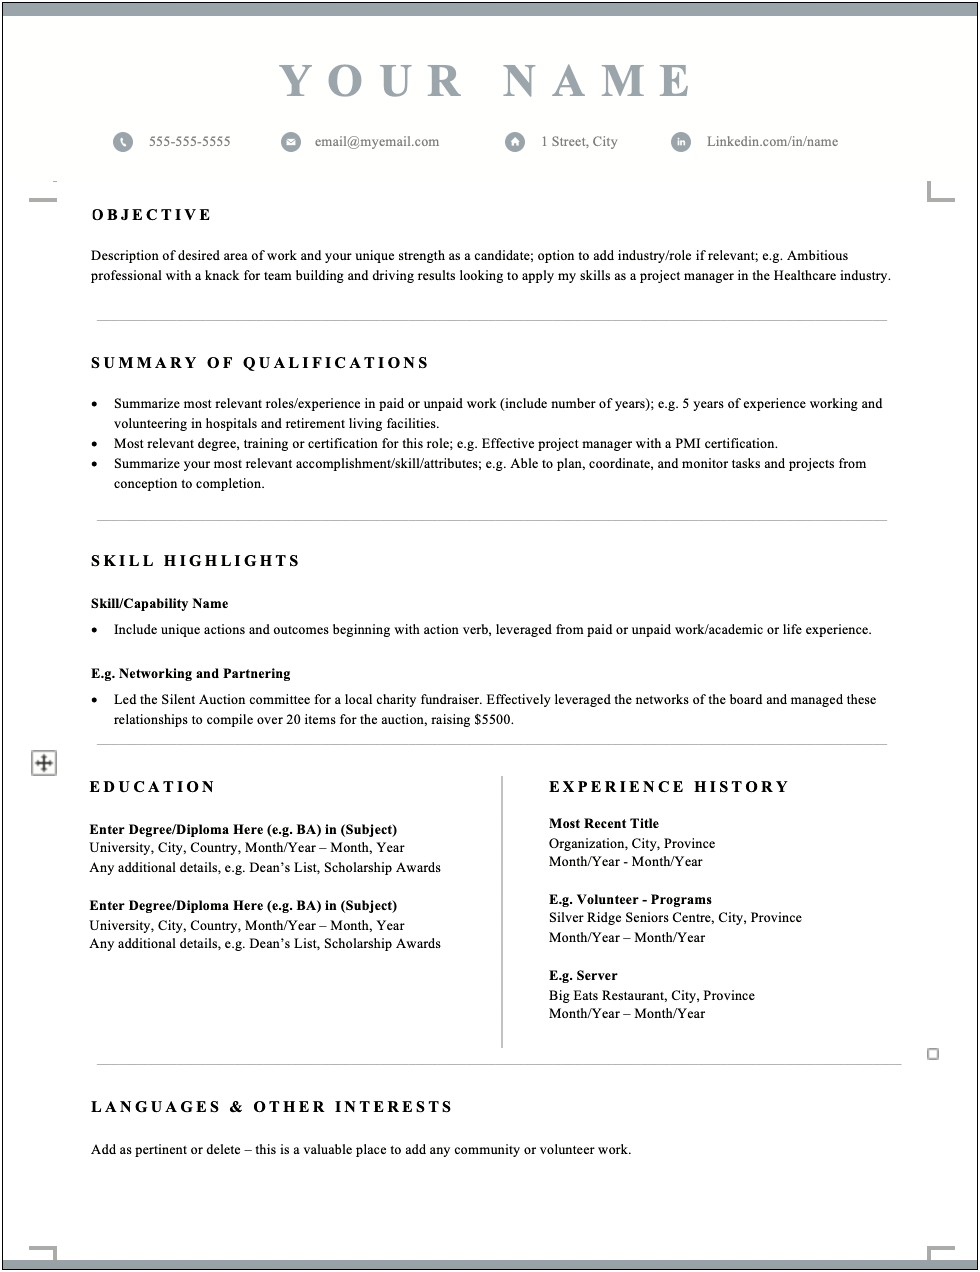 Canada Immigration Express Entry Resume Sample